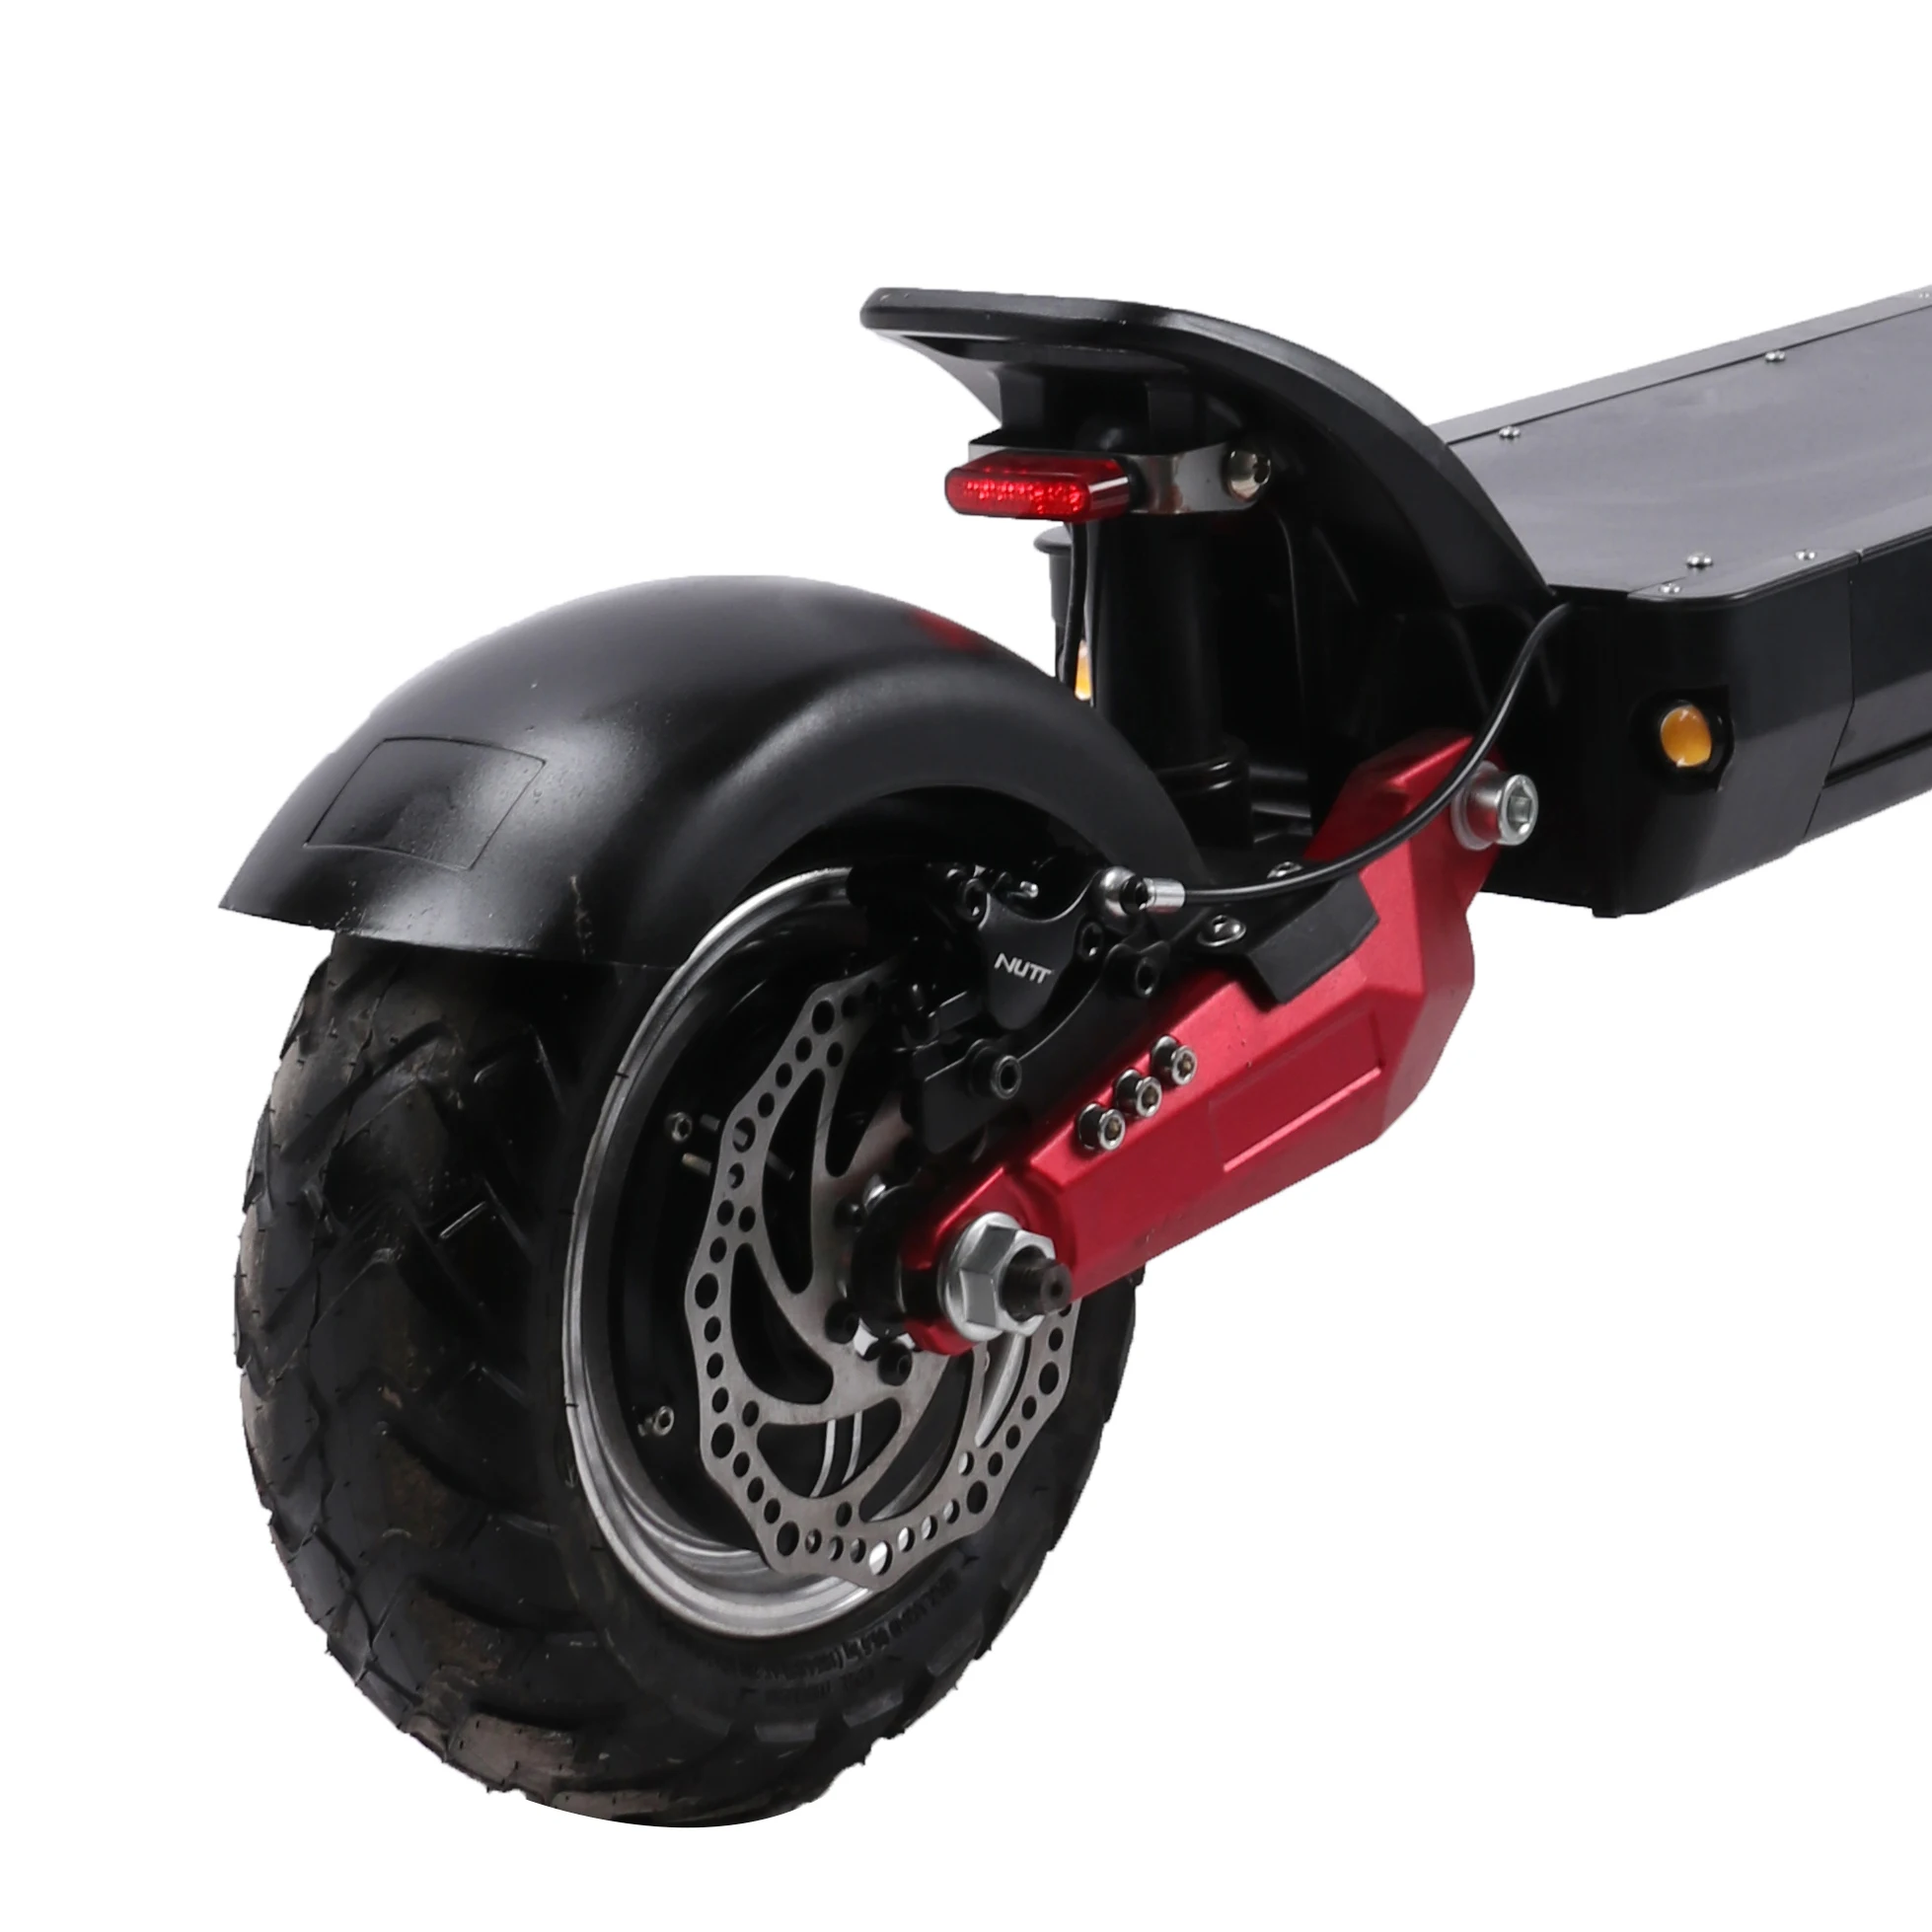 Original Factory New Arrival 1200w Double Motors Scooters Electric Foldable Dual Motor Scooter with Disc Brake Fast Motorcycle